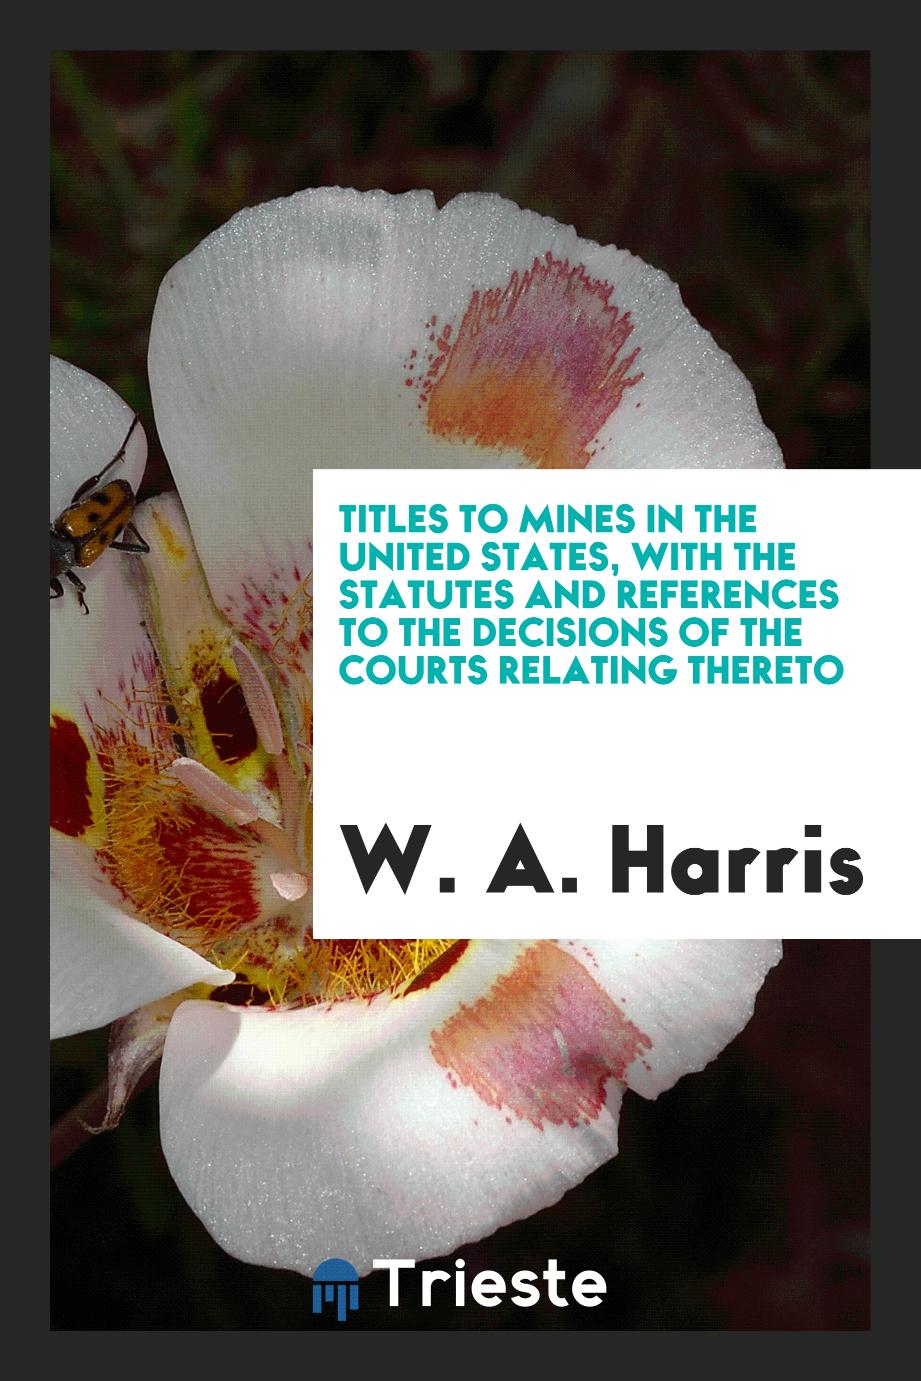 Titles to Mines in the United States, with the Statutes and References to the Decisions of the Courts Relating Thereto